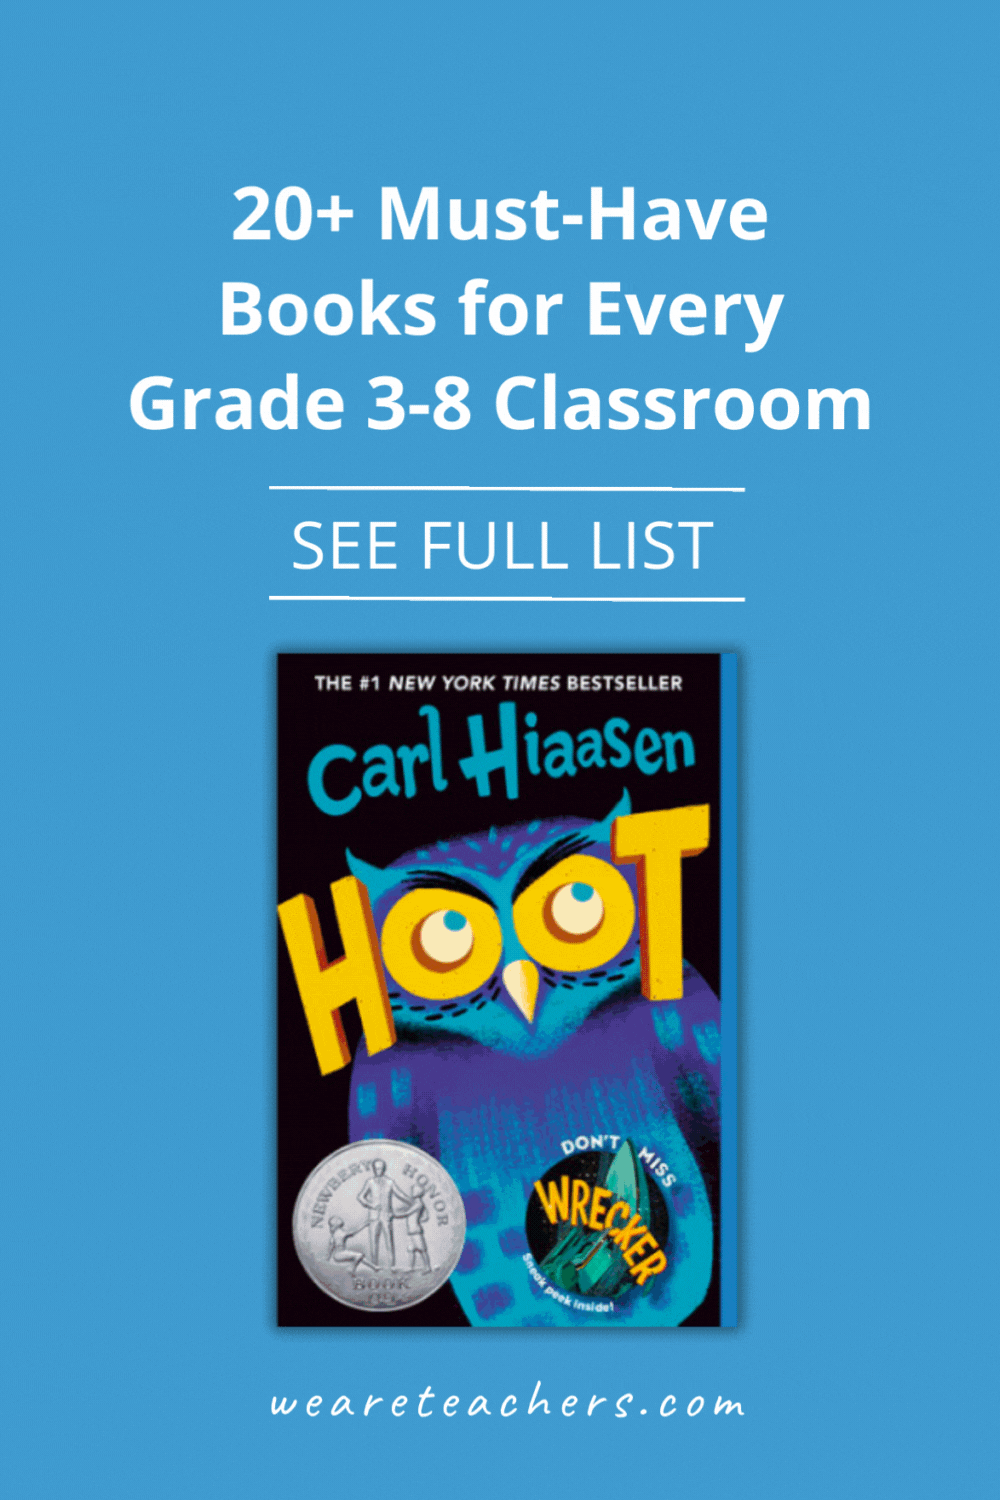 These new middle grade books are the perfect addition to your classroom! Check out teacher-favorite authors, award winners, and more.